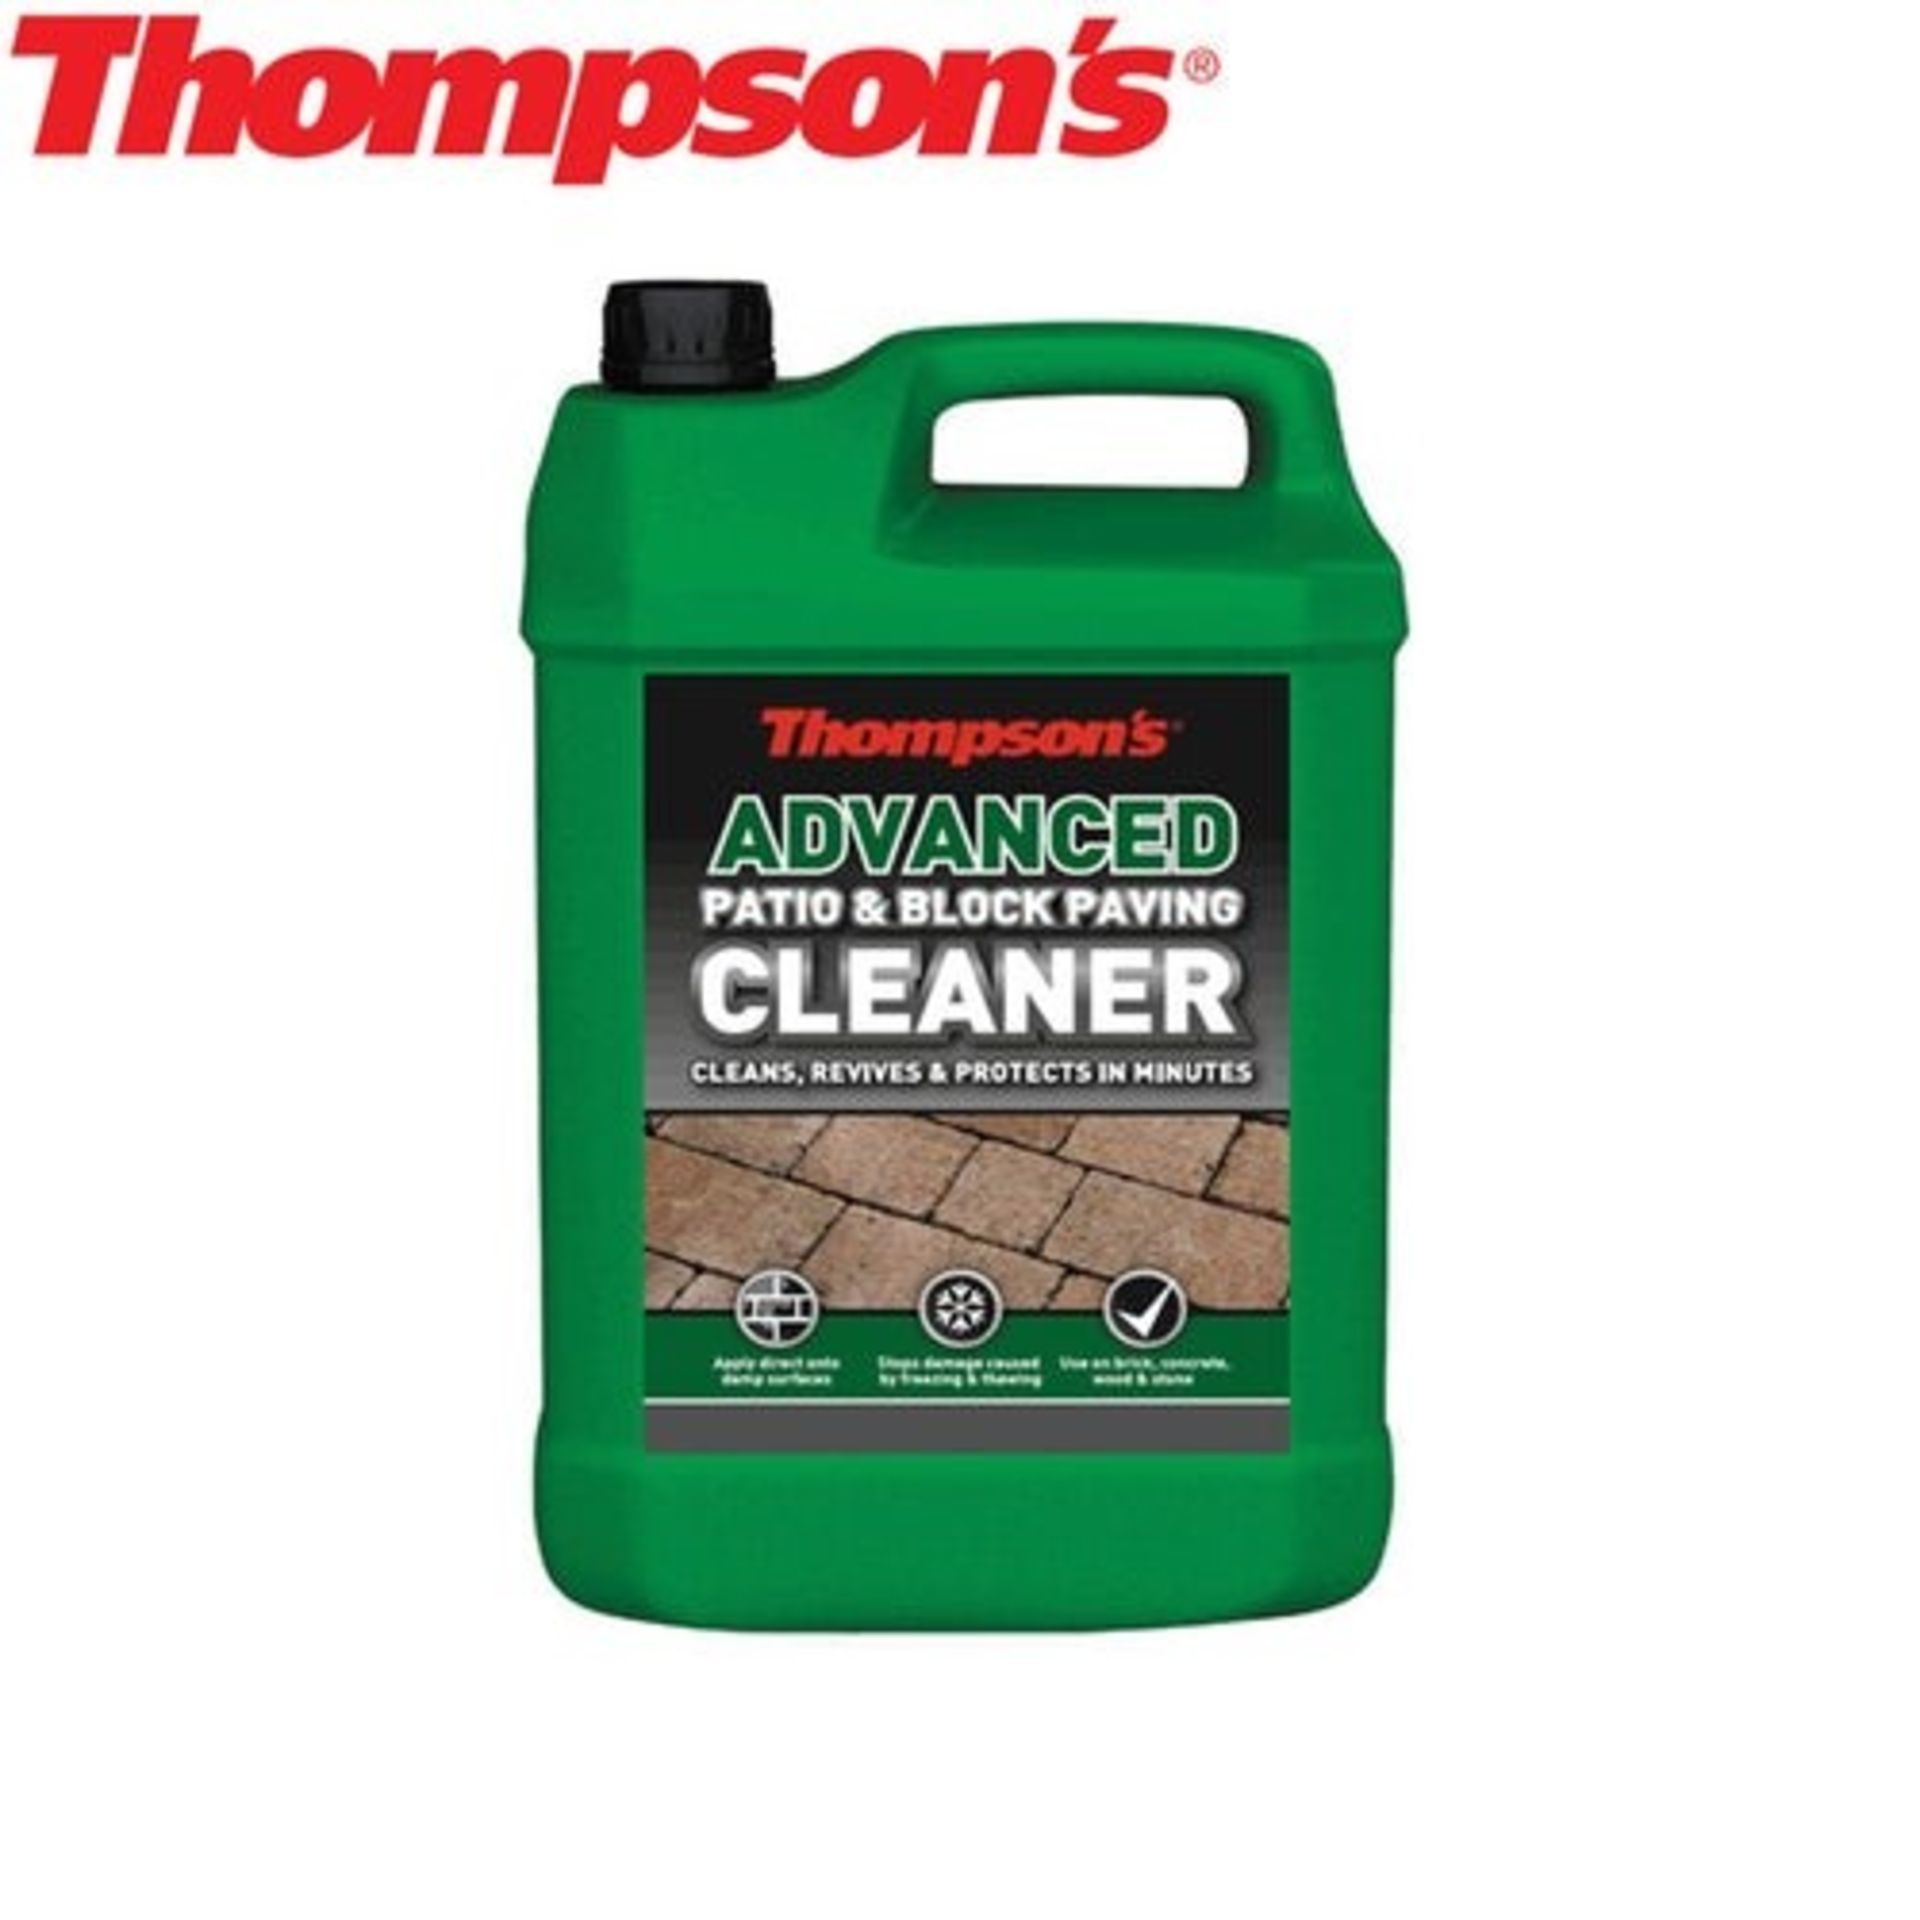 1 THOMPSONS ADVANCED PATIO & BLOCK PAVING CLEANER - 5 LITRES / PN - 210 / RRP £20.00 (VIEWING HIGHLY